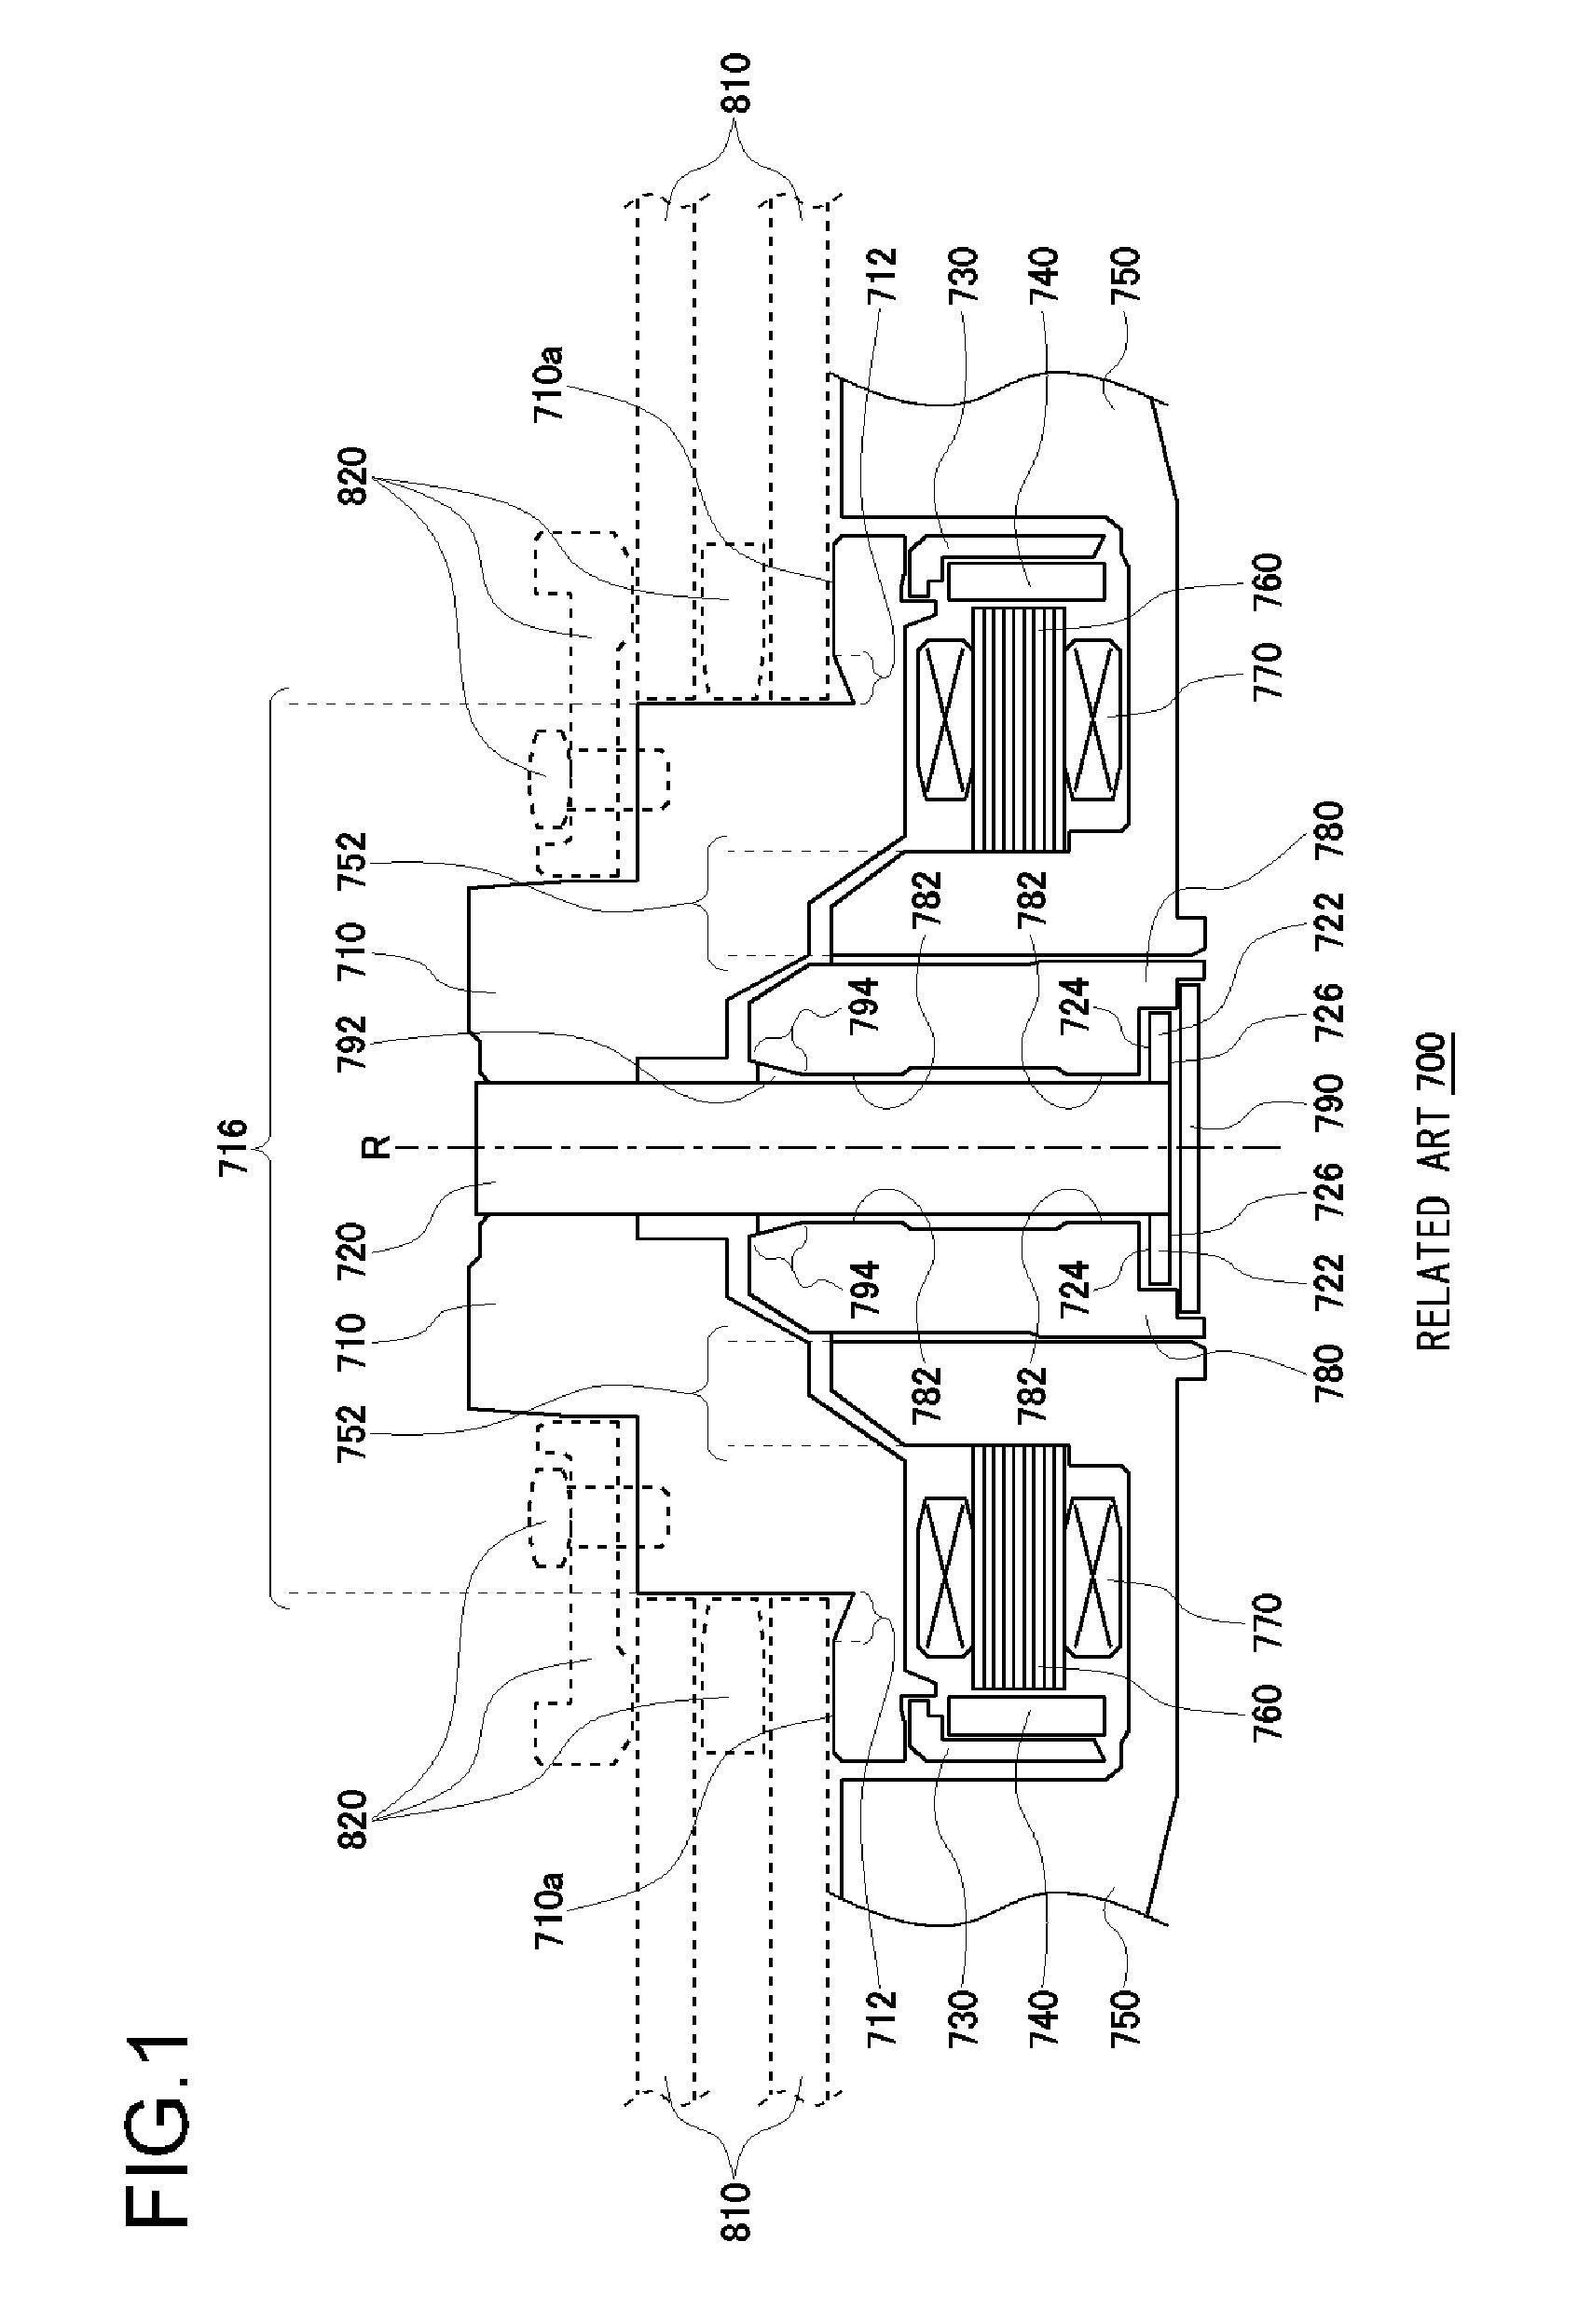 Disk drive device